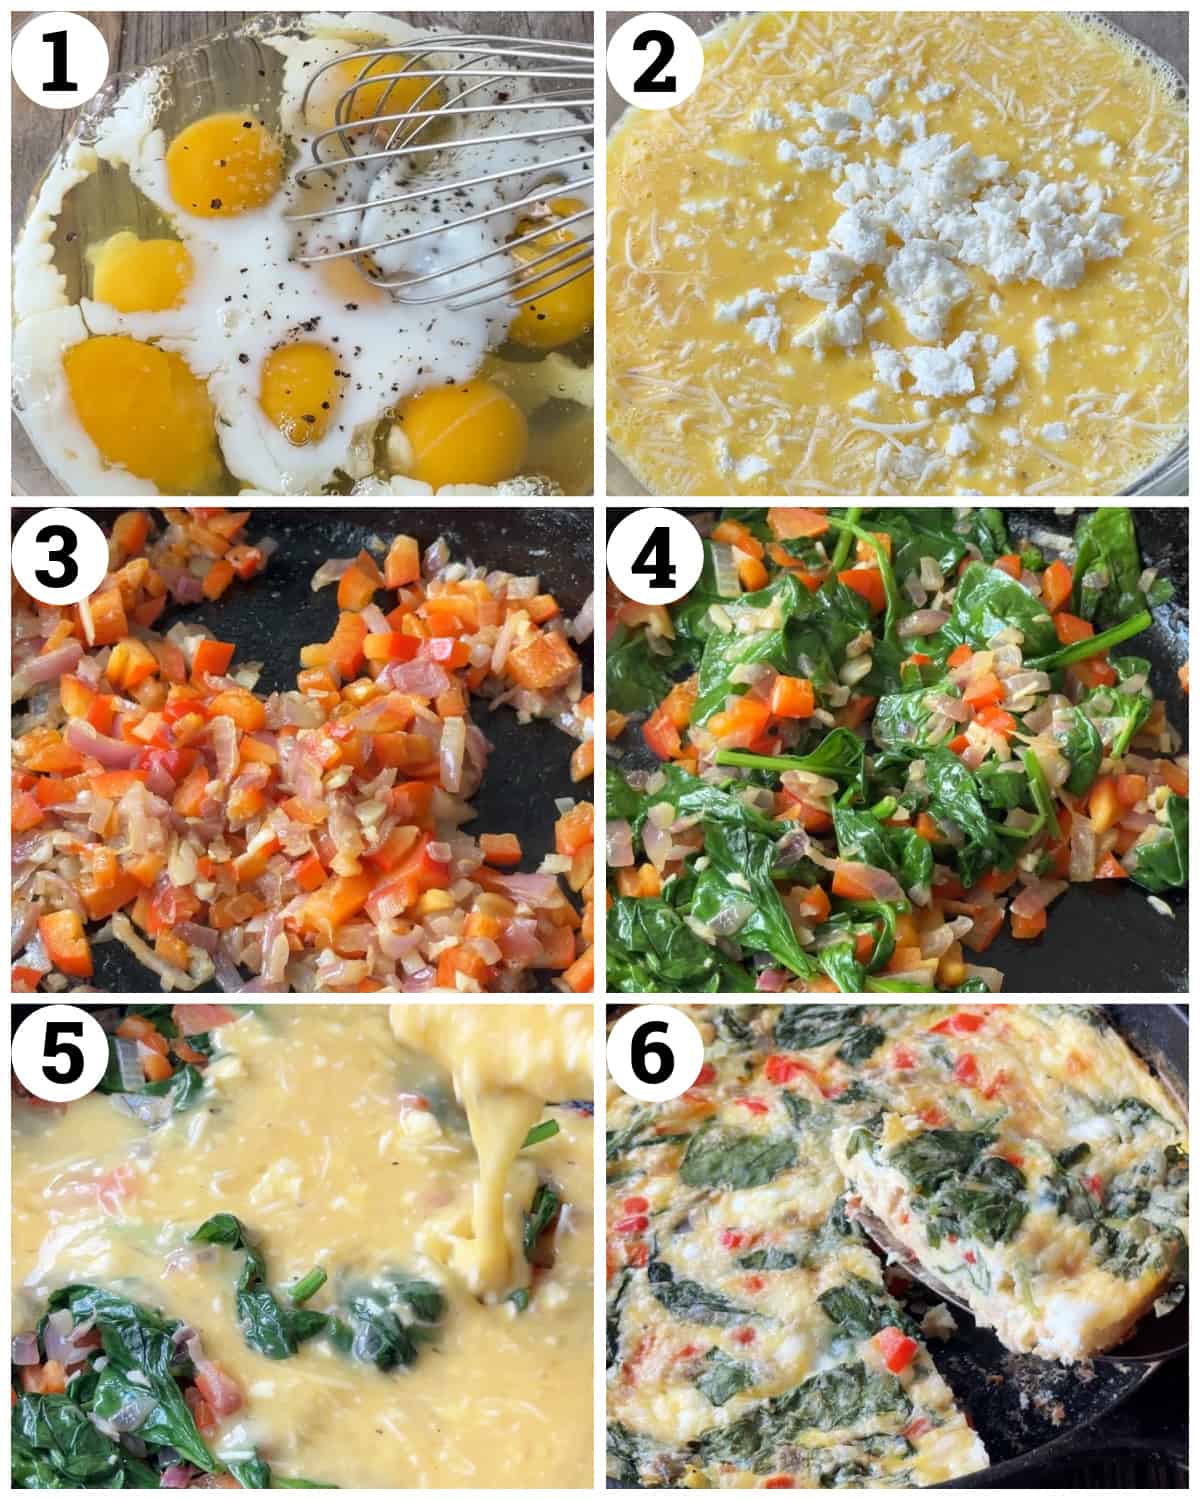 Mix the eggs, add the cheese, saute the vegetables, add the eggs and bake. 